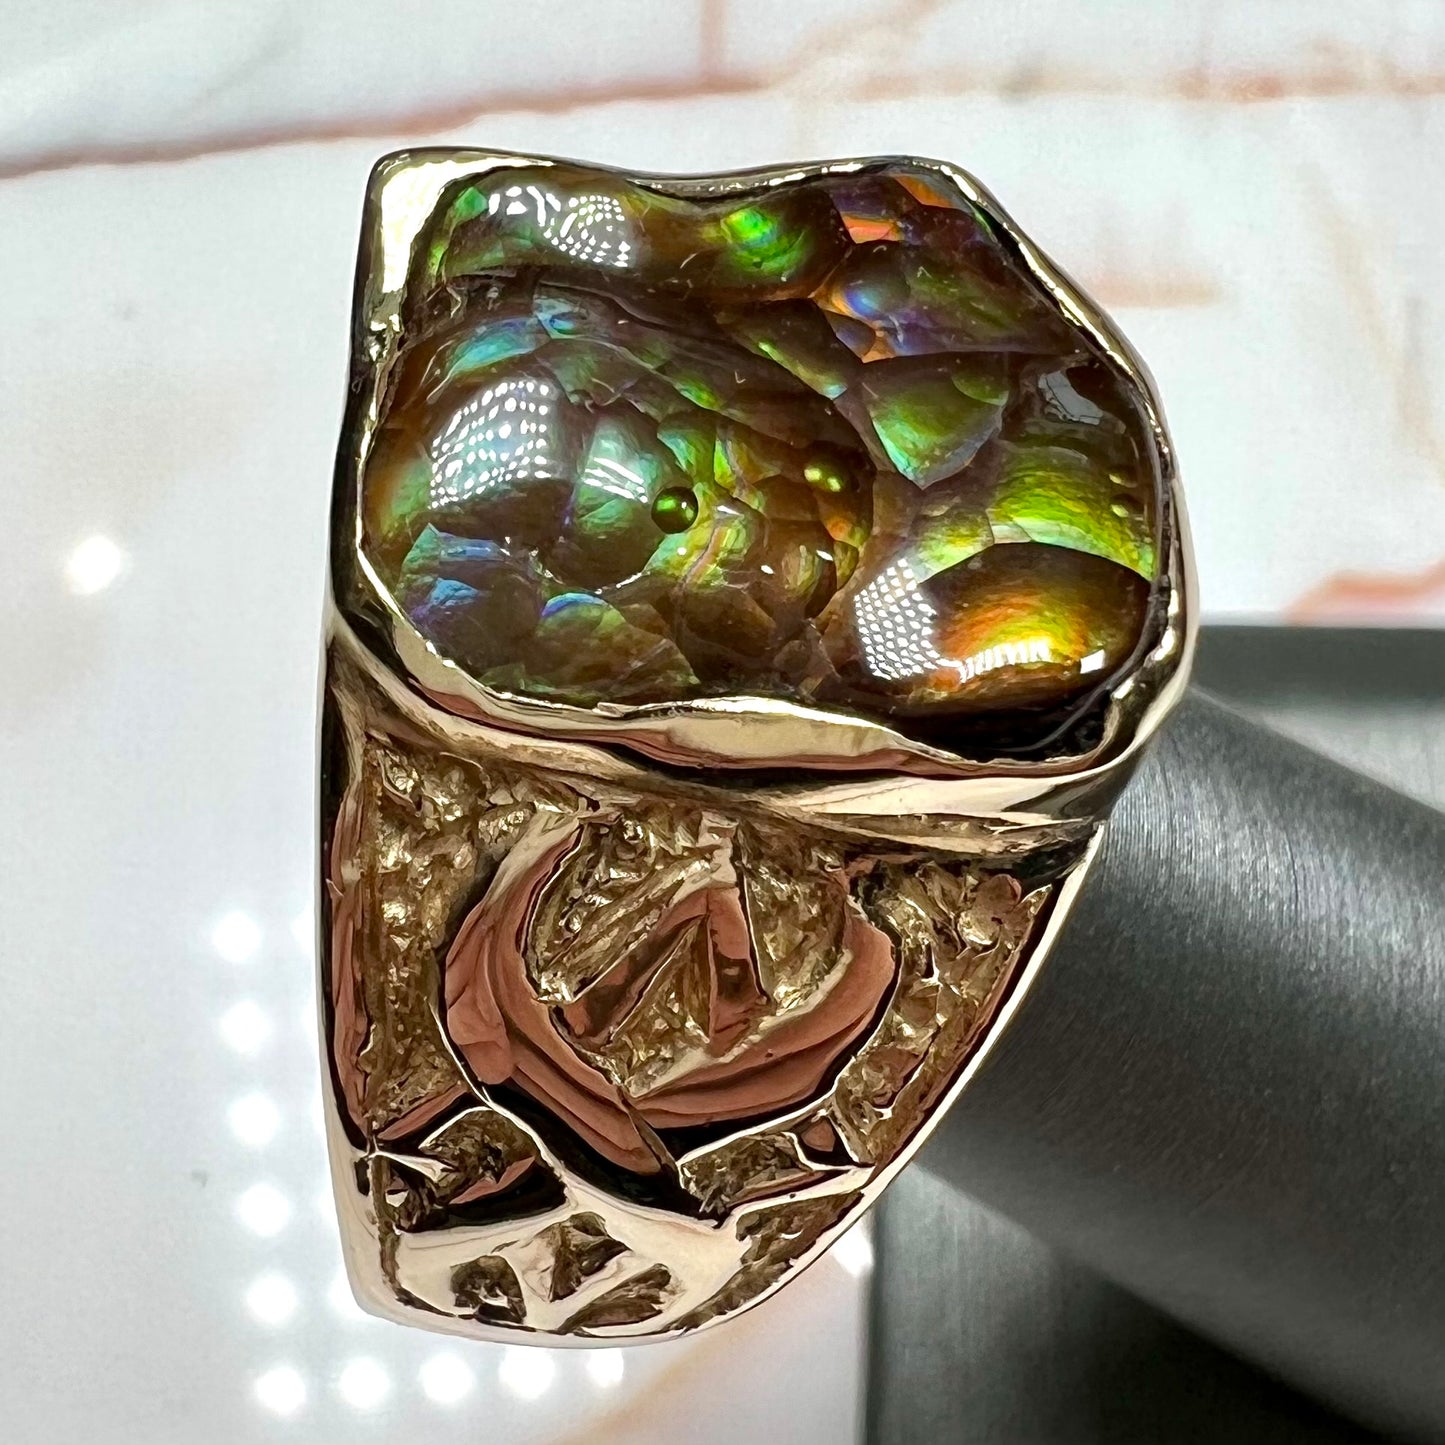 Custom, heavy yellow gold men's ring set with fire agate from Deer Creek, Arizona.